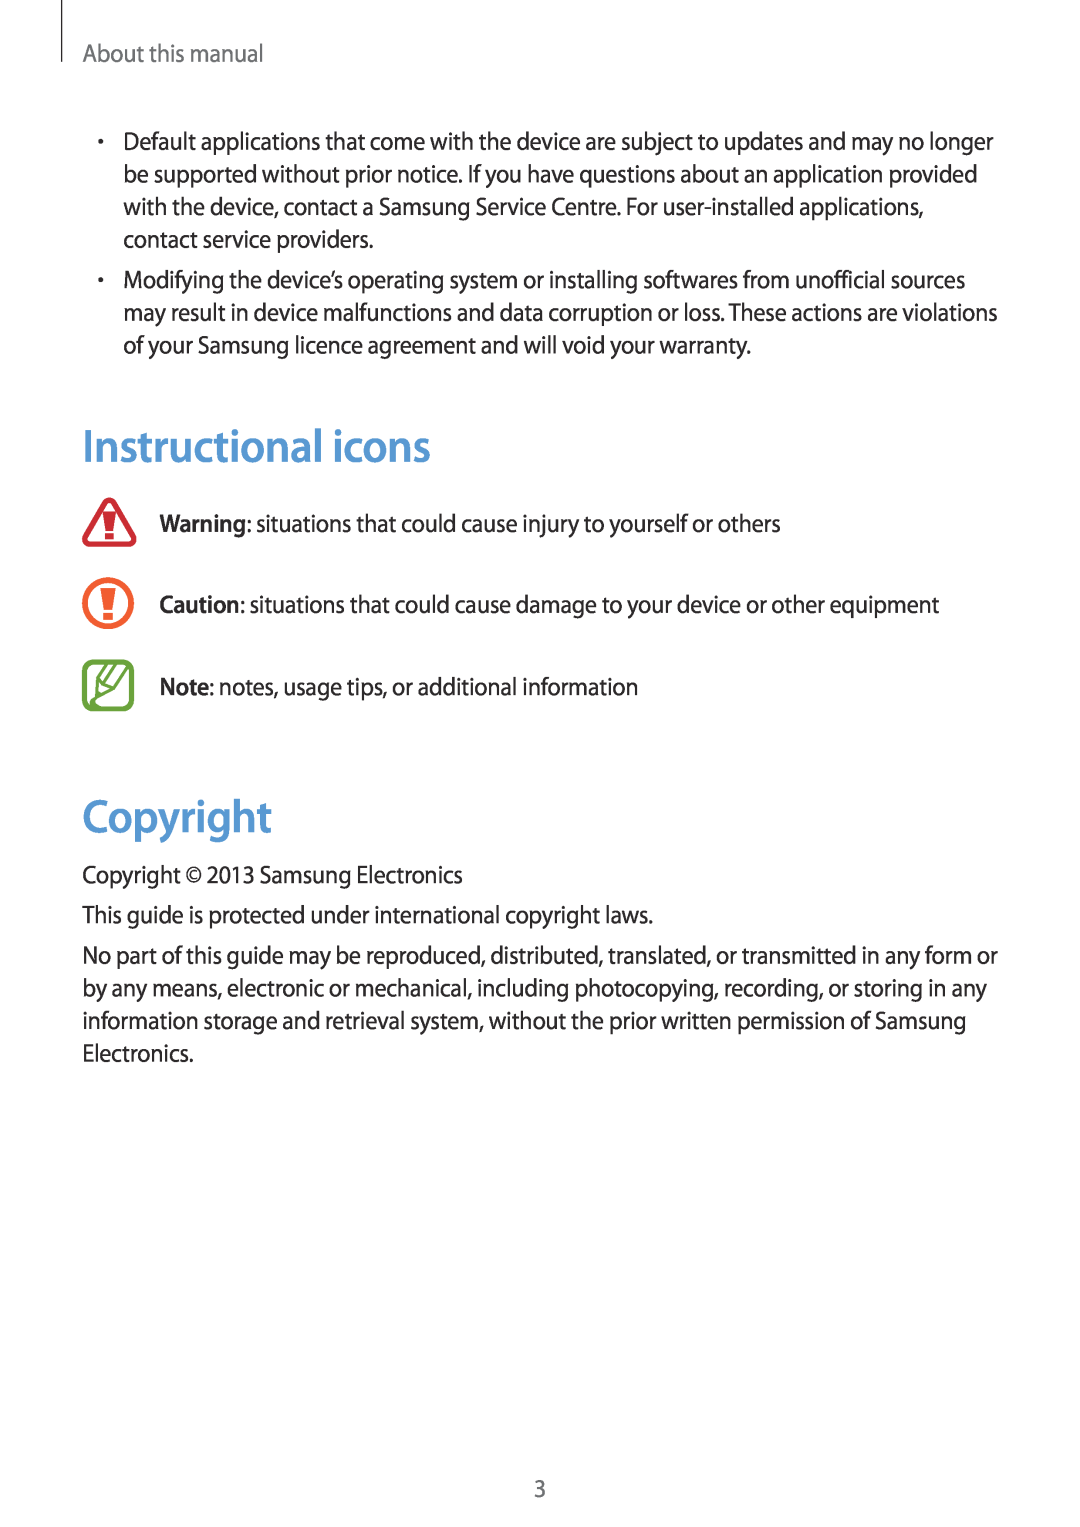 Samsung GT-S6790PWNDBT, GT-S6790ZWYSEB, GT-S6790PWNTPH, GT-S6790MKNDBT Instructional icons, Copyright, About this manual 